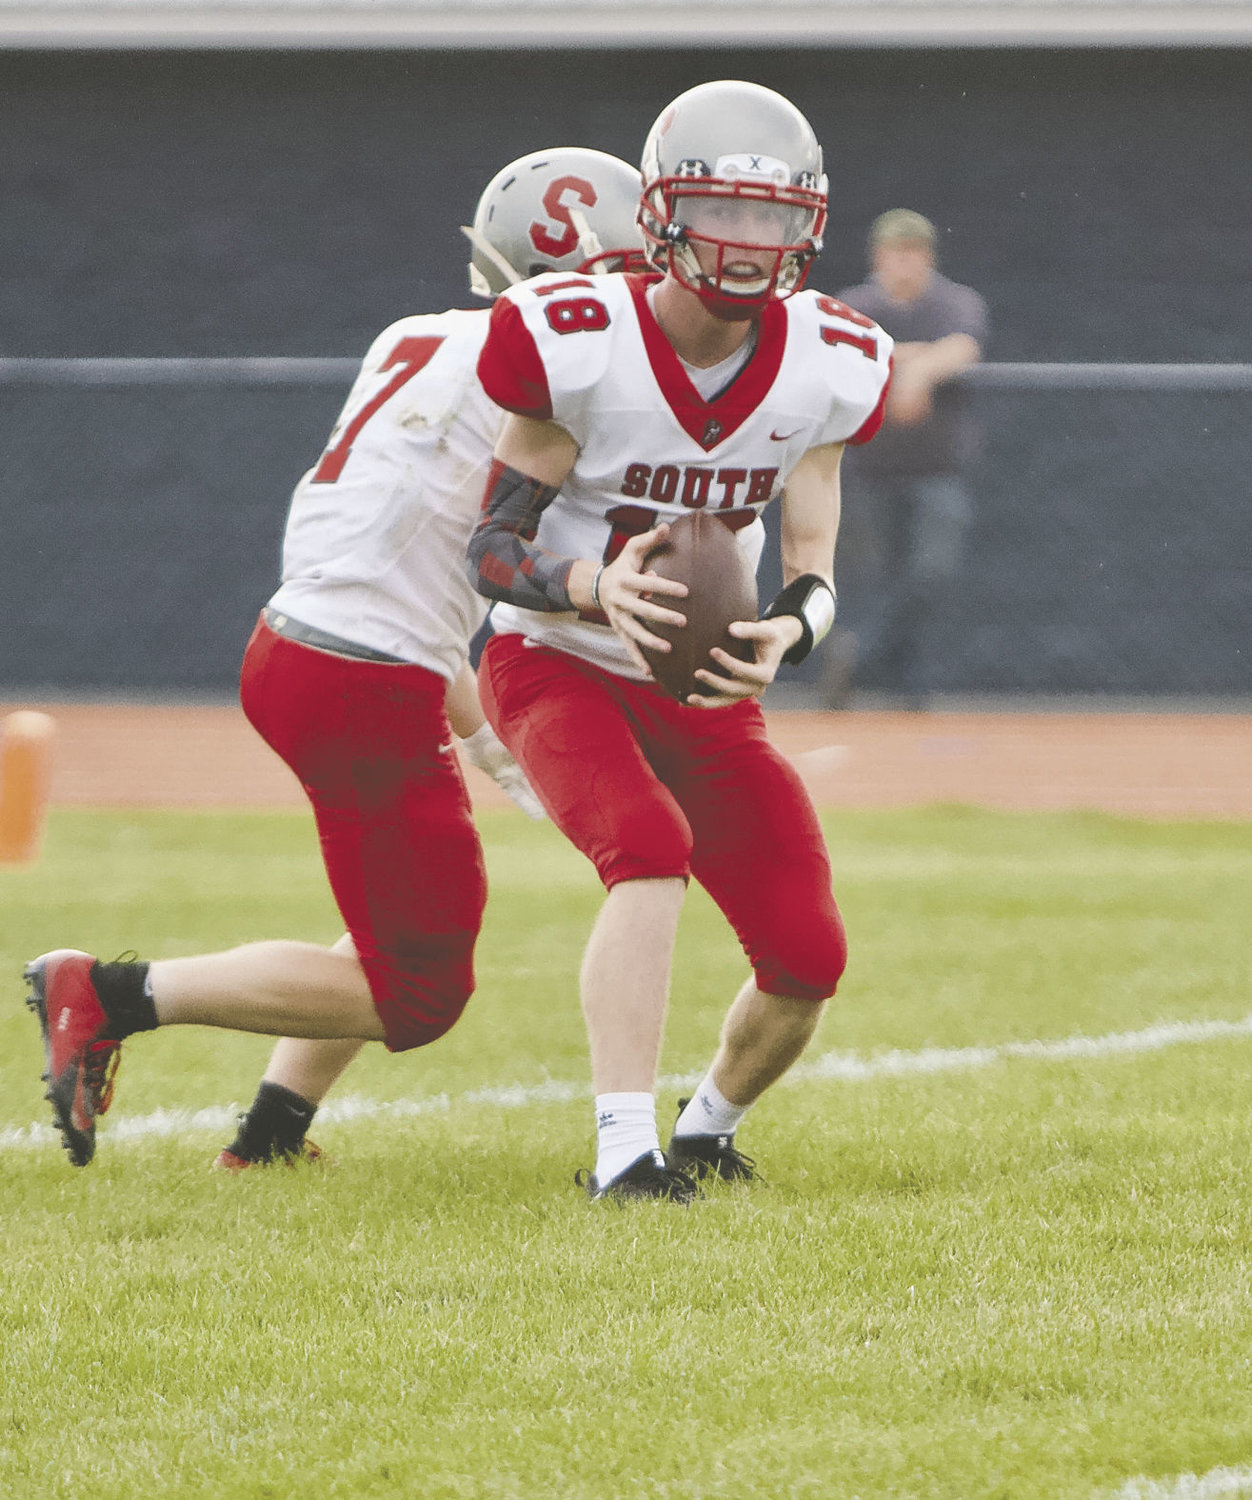 Southmont sophomore quarterback Trent Jones tossed a pair of touchdowns in the Mountie's 28-26 loss to North Putnam.